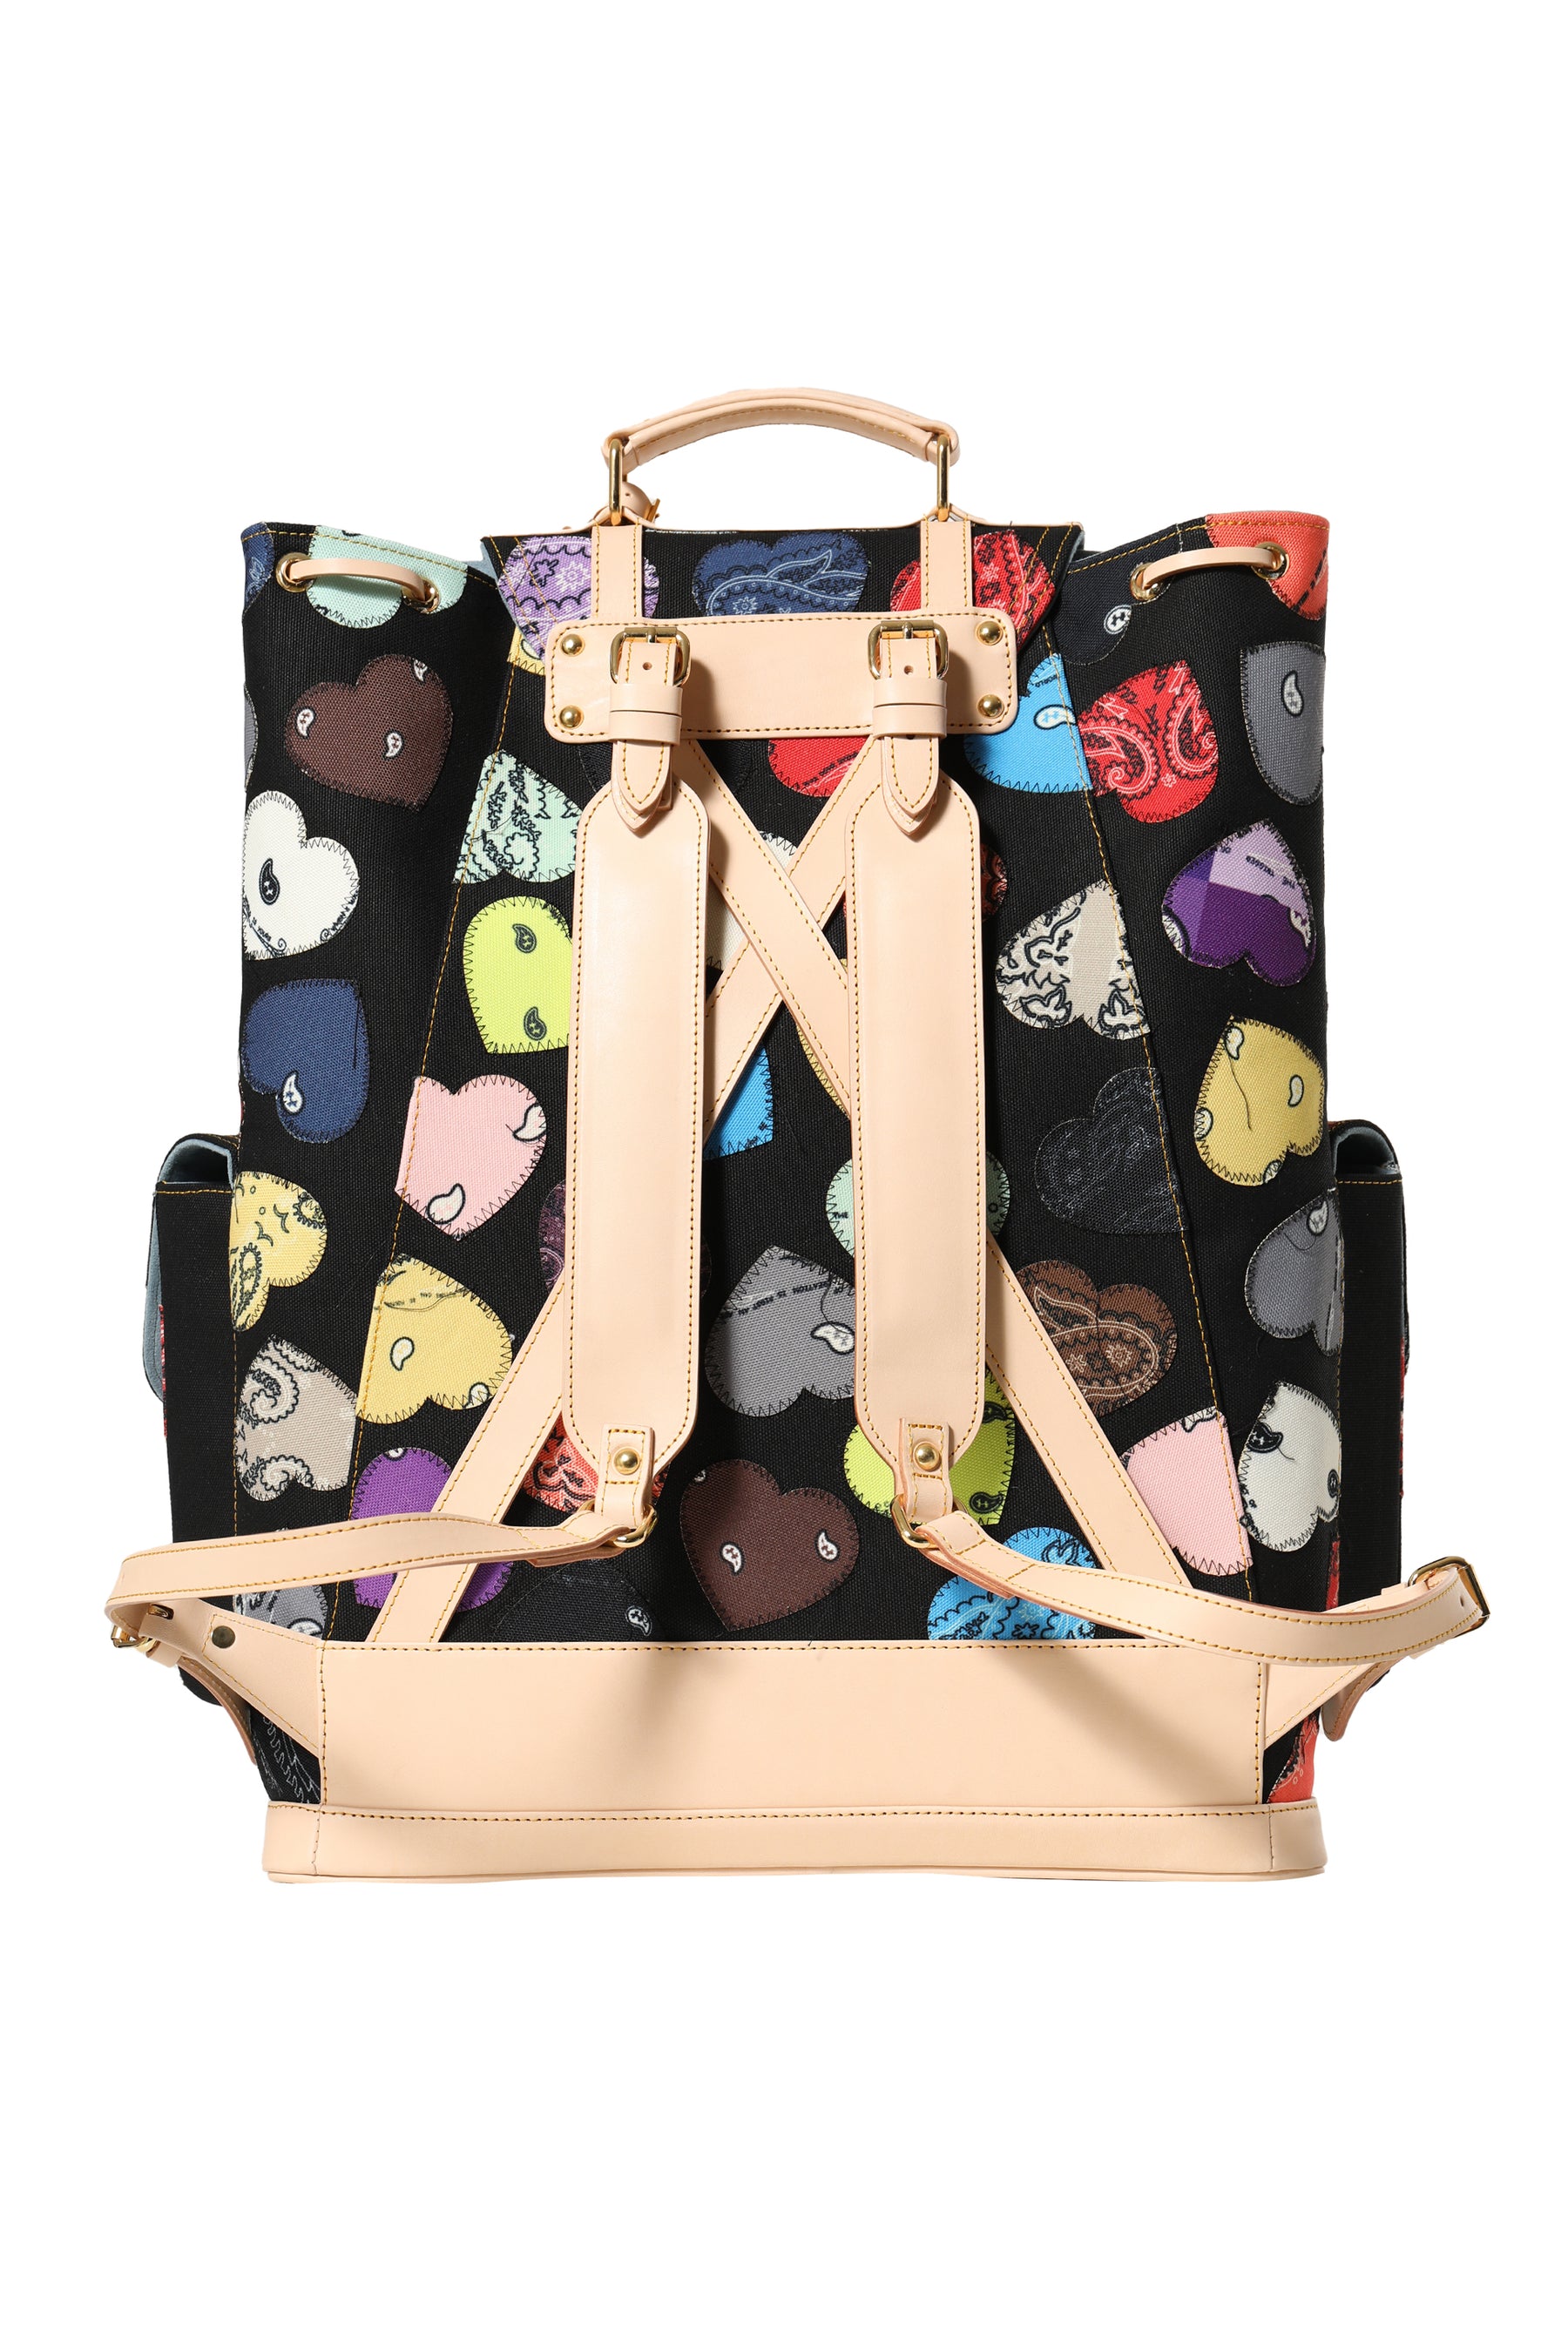 HEART PATCH PAISLEY BACKPACK / BLK